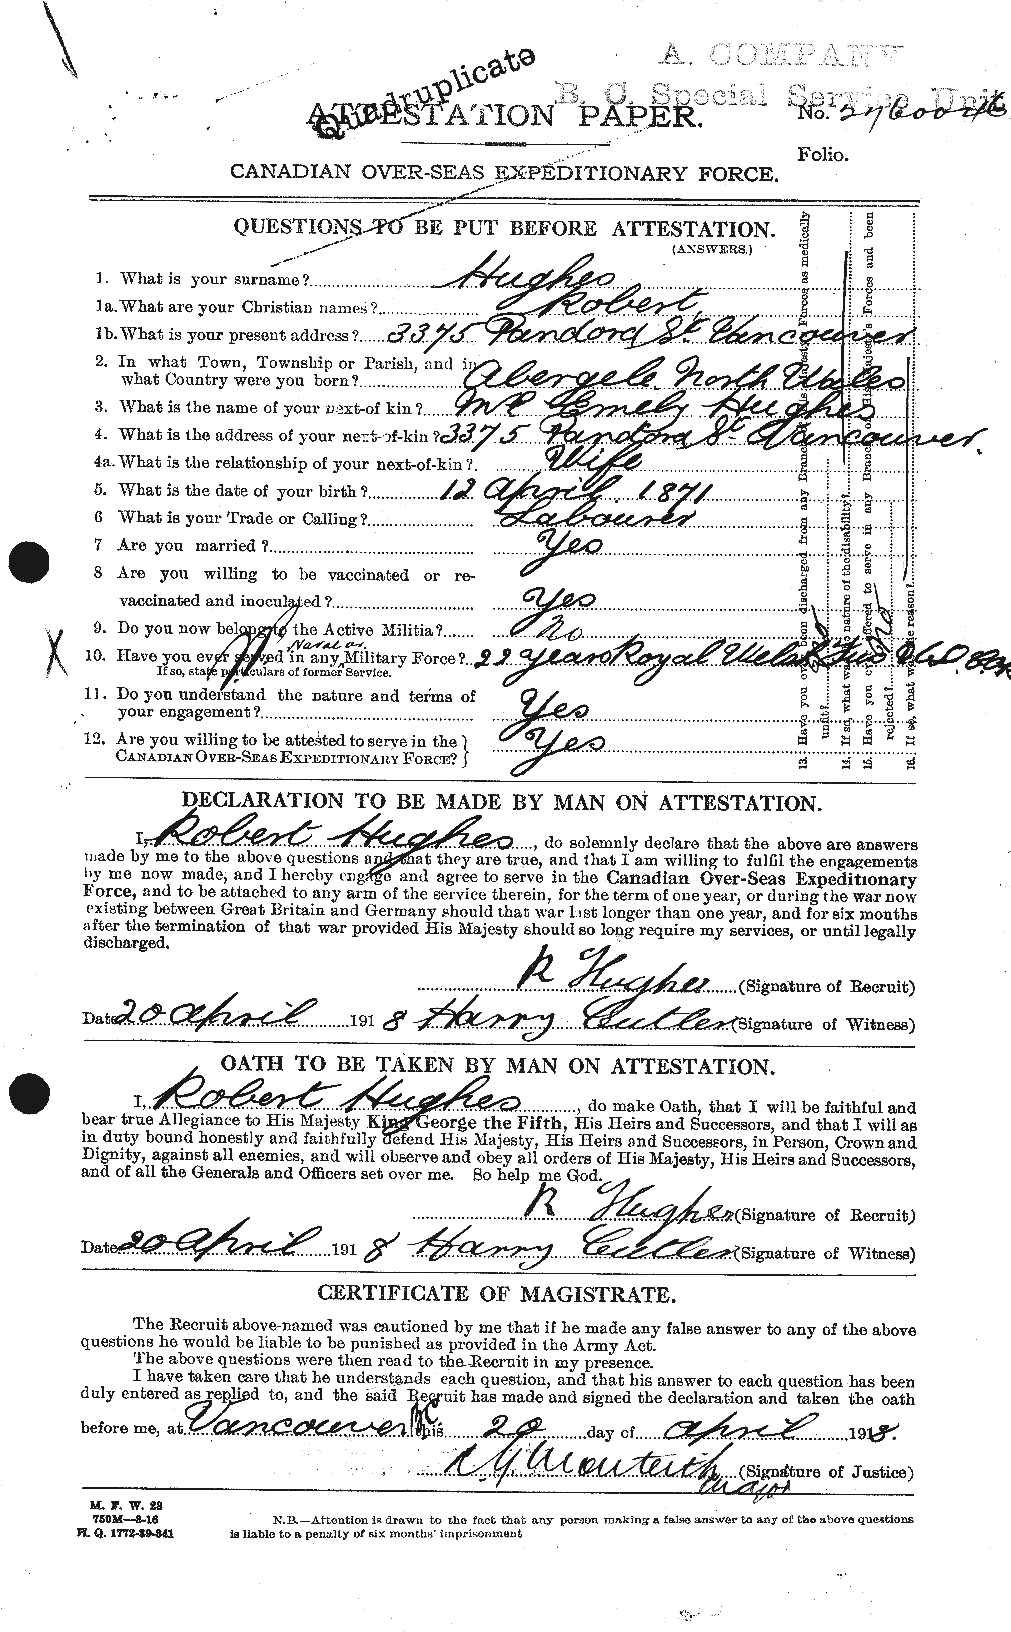 Personnel Records of the First World War - CEF 406602a